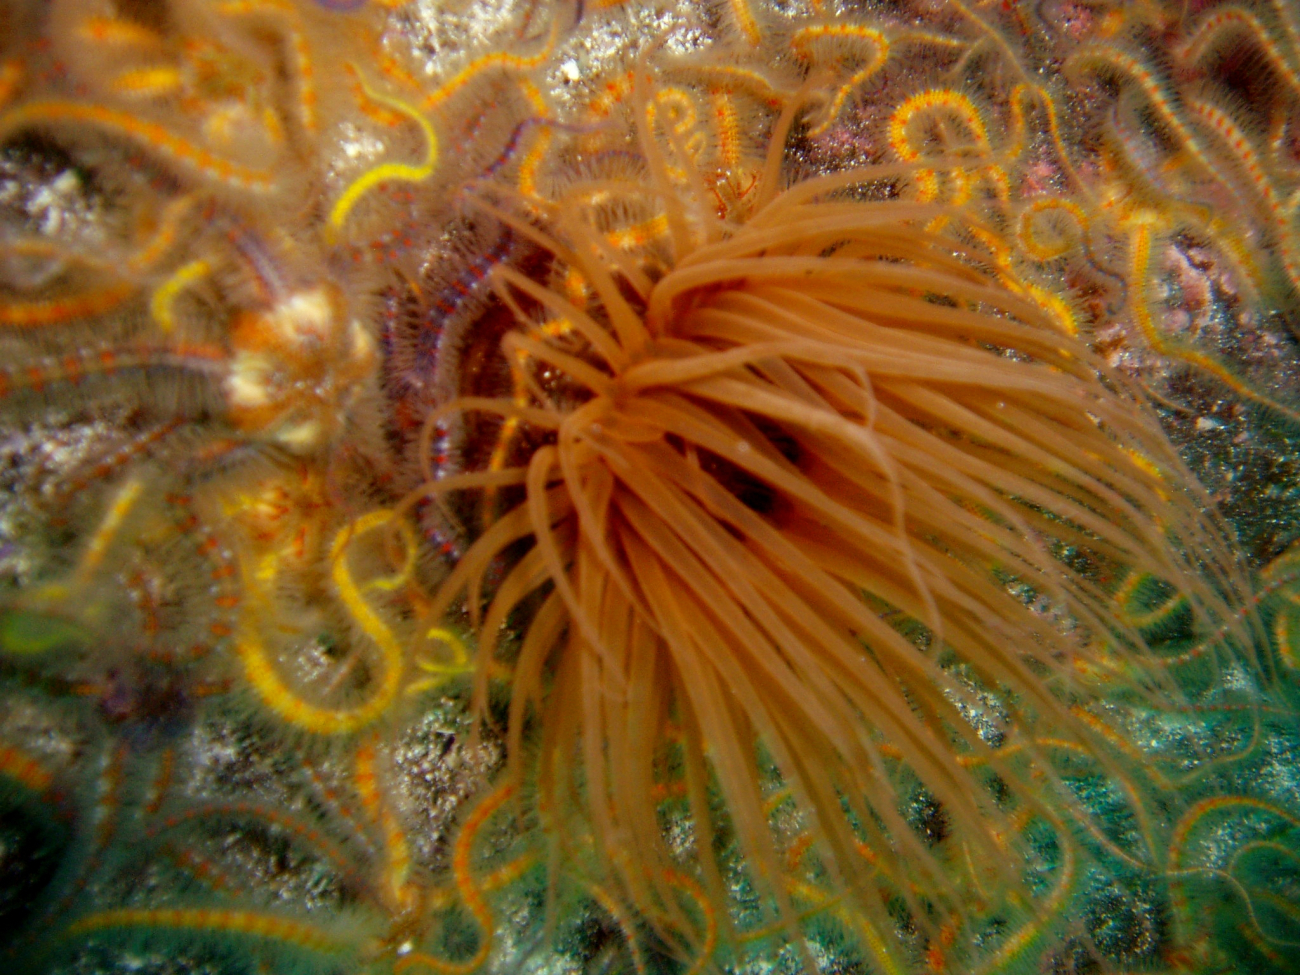 Tube dwelling anemone (Pachycerianthus fimbriatus) and a mass of brittle stars